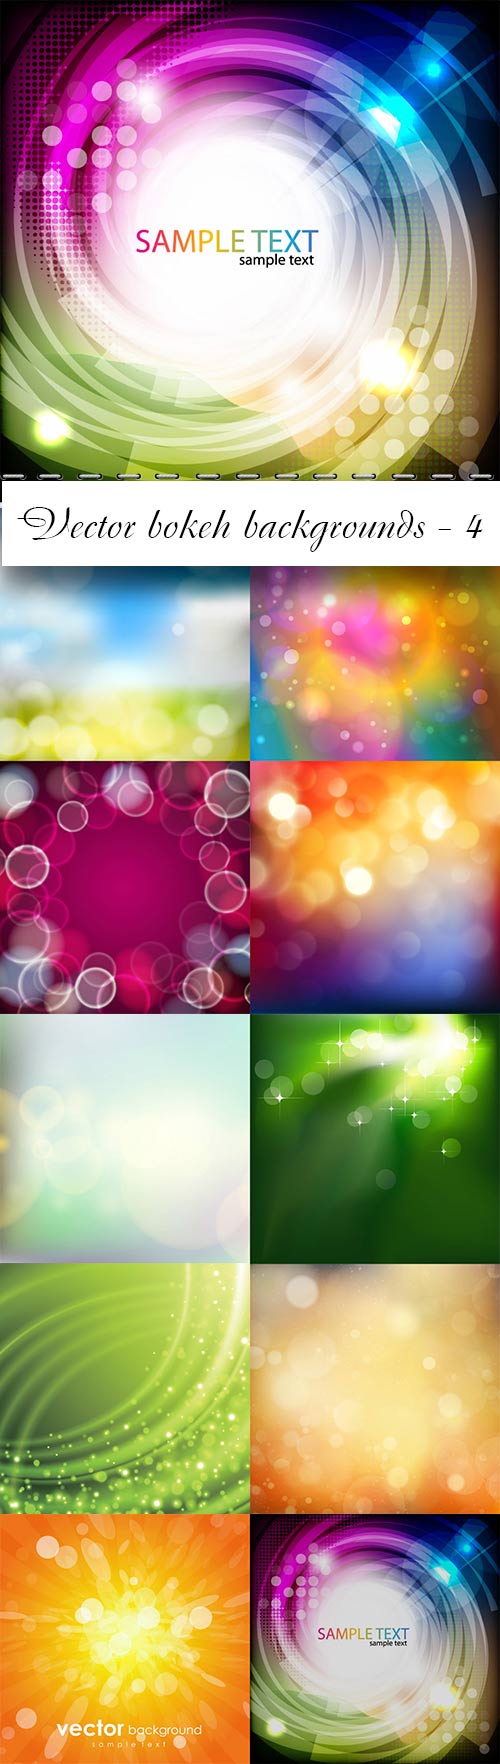 Vector bokeh colorful backgrounds - 4